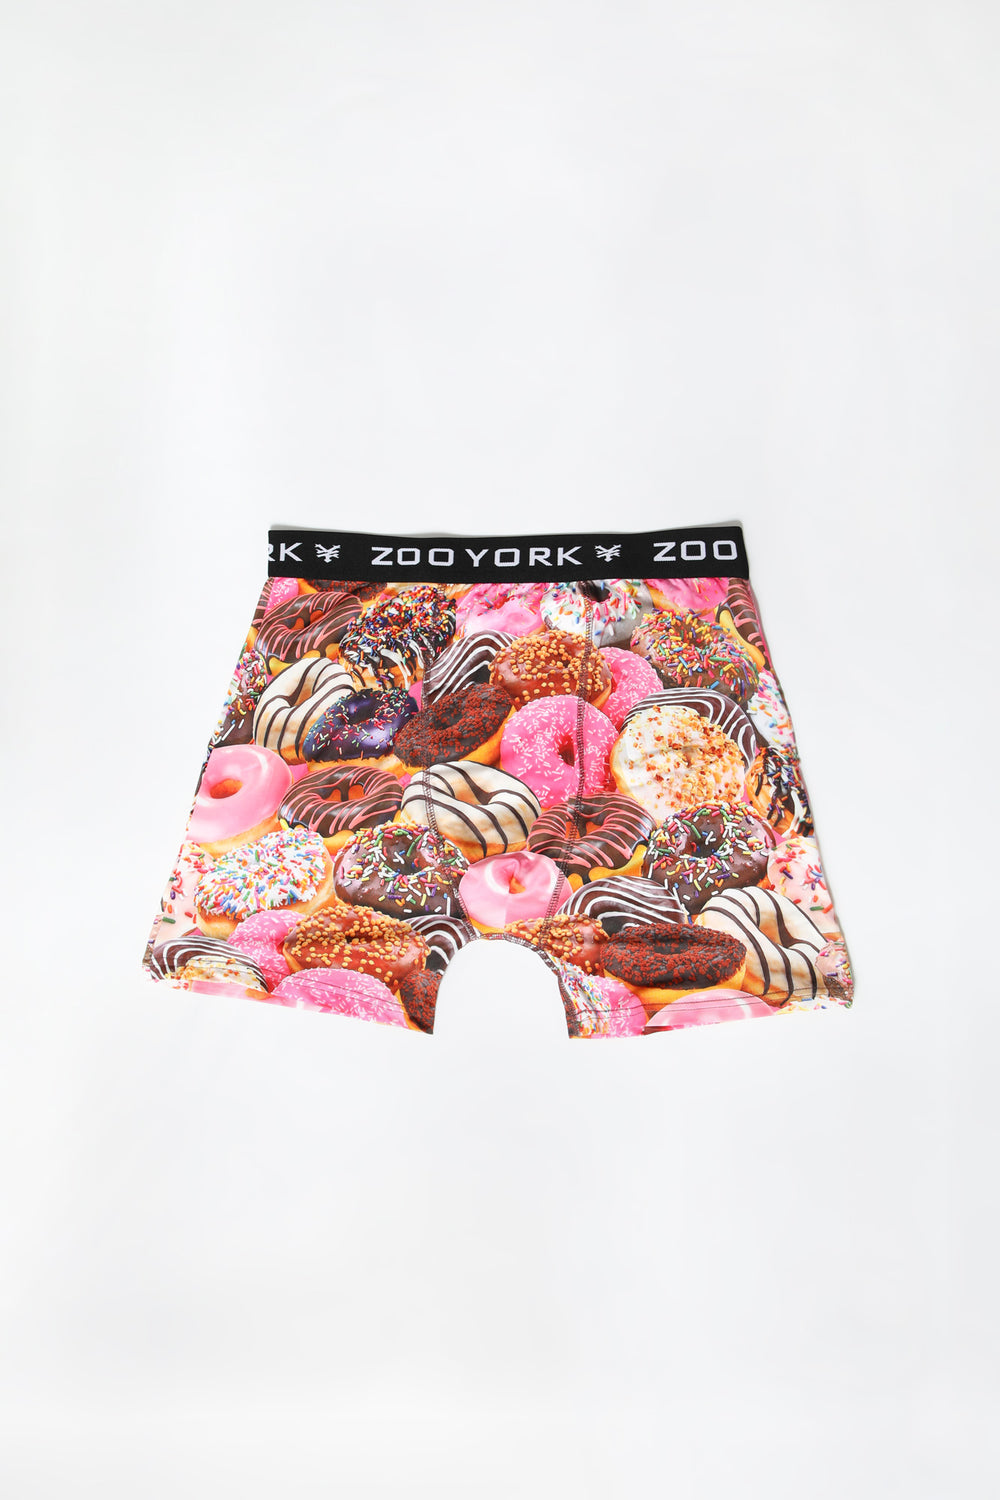 Zoo York Youth Donut Boxer Brief Multi